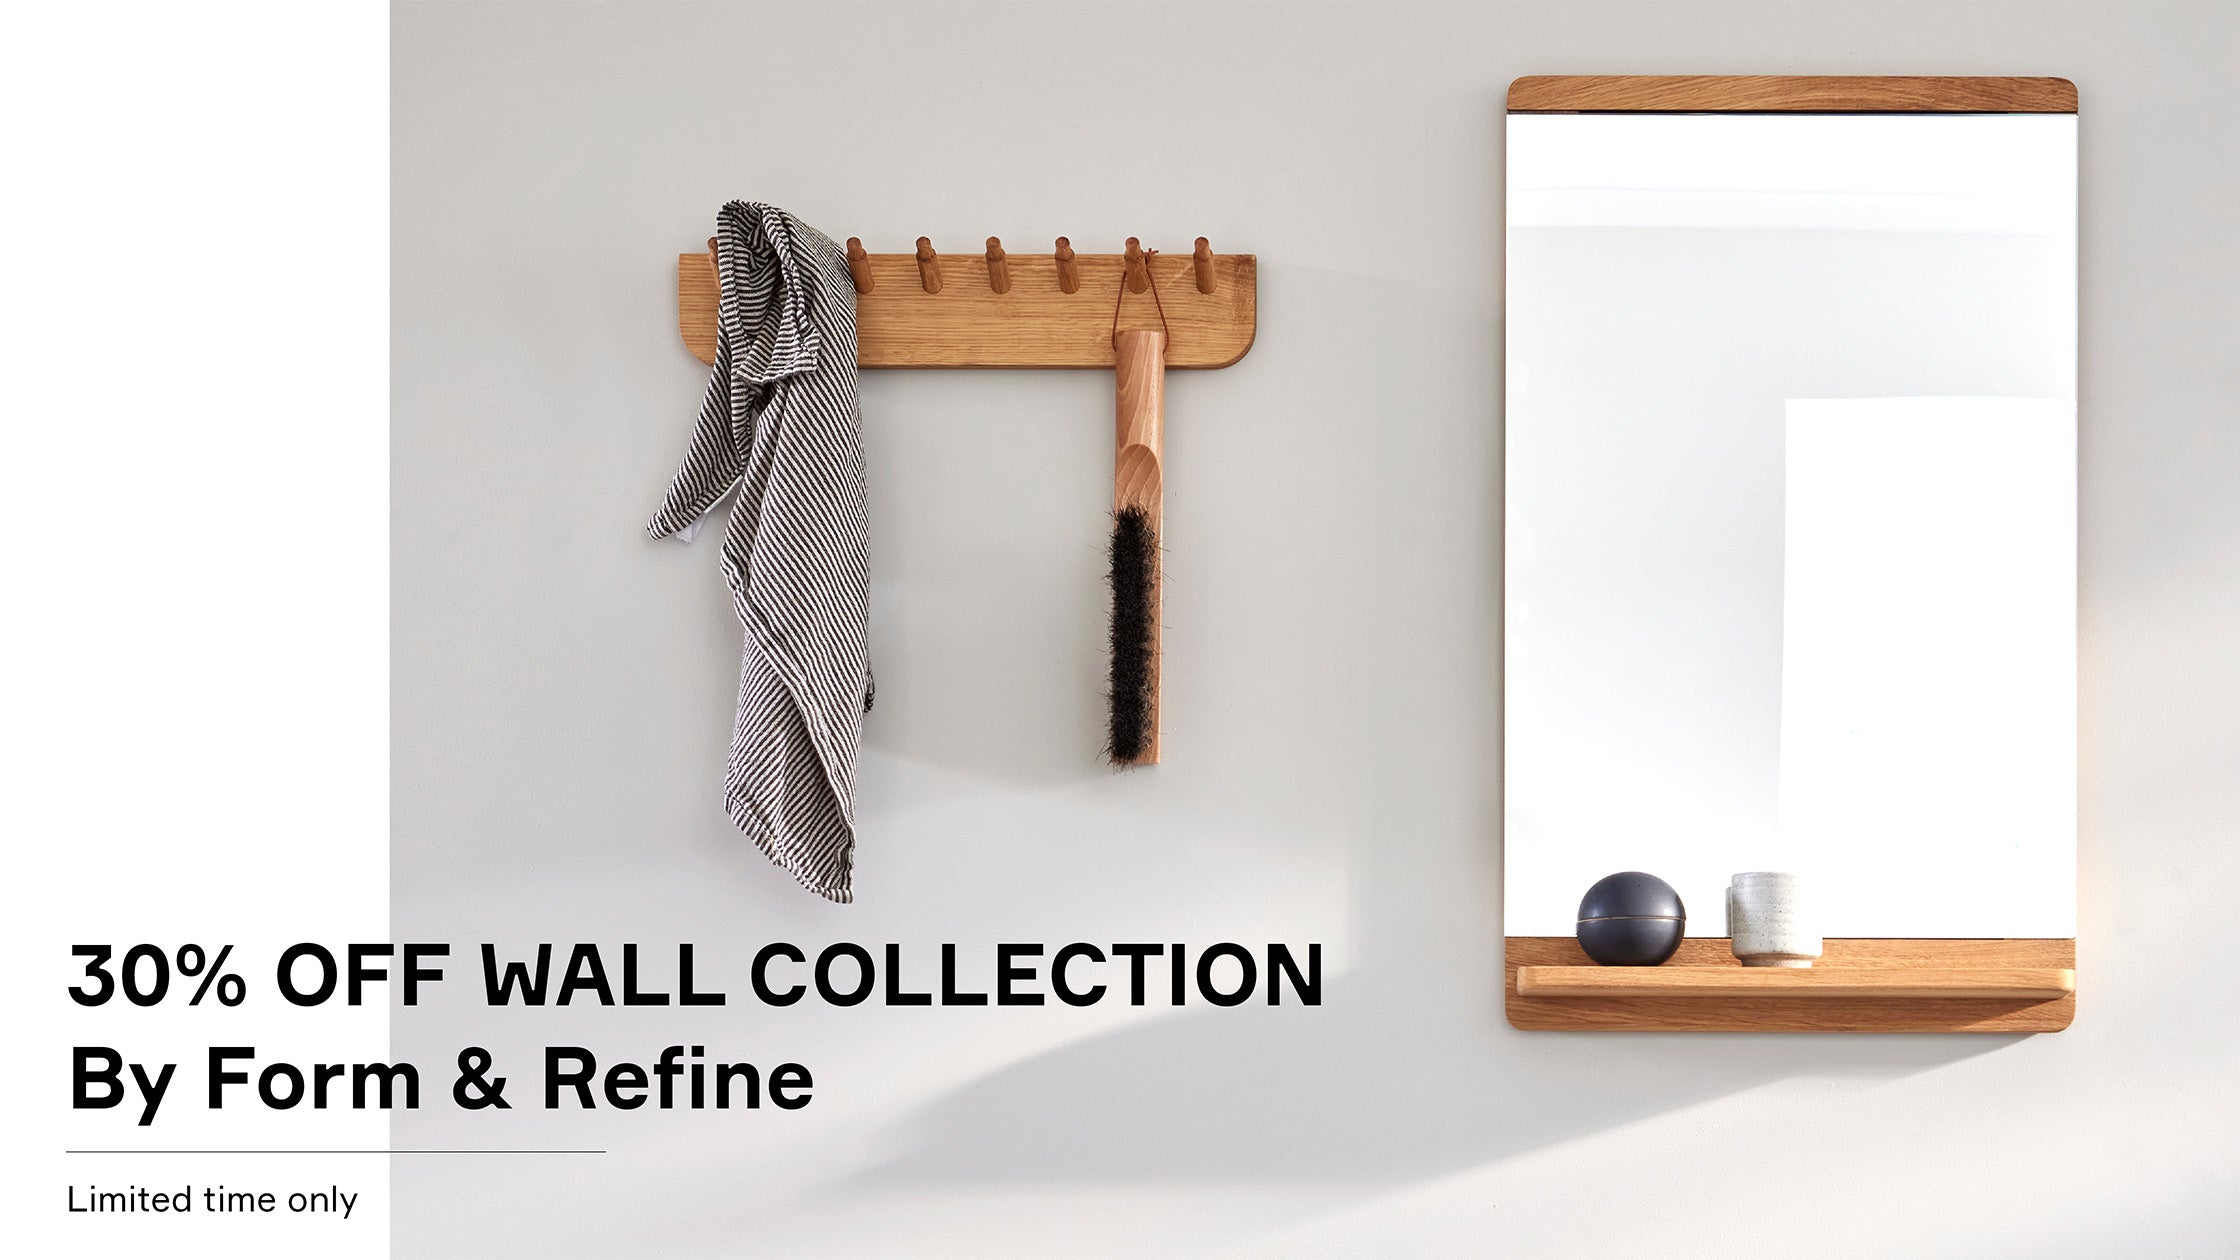 Wall Campaign by Form & Refine